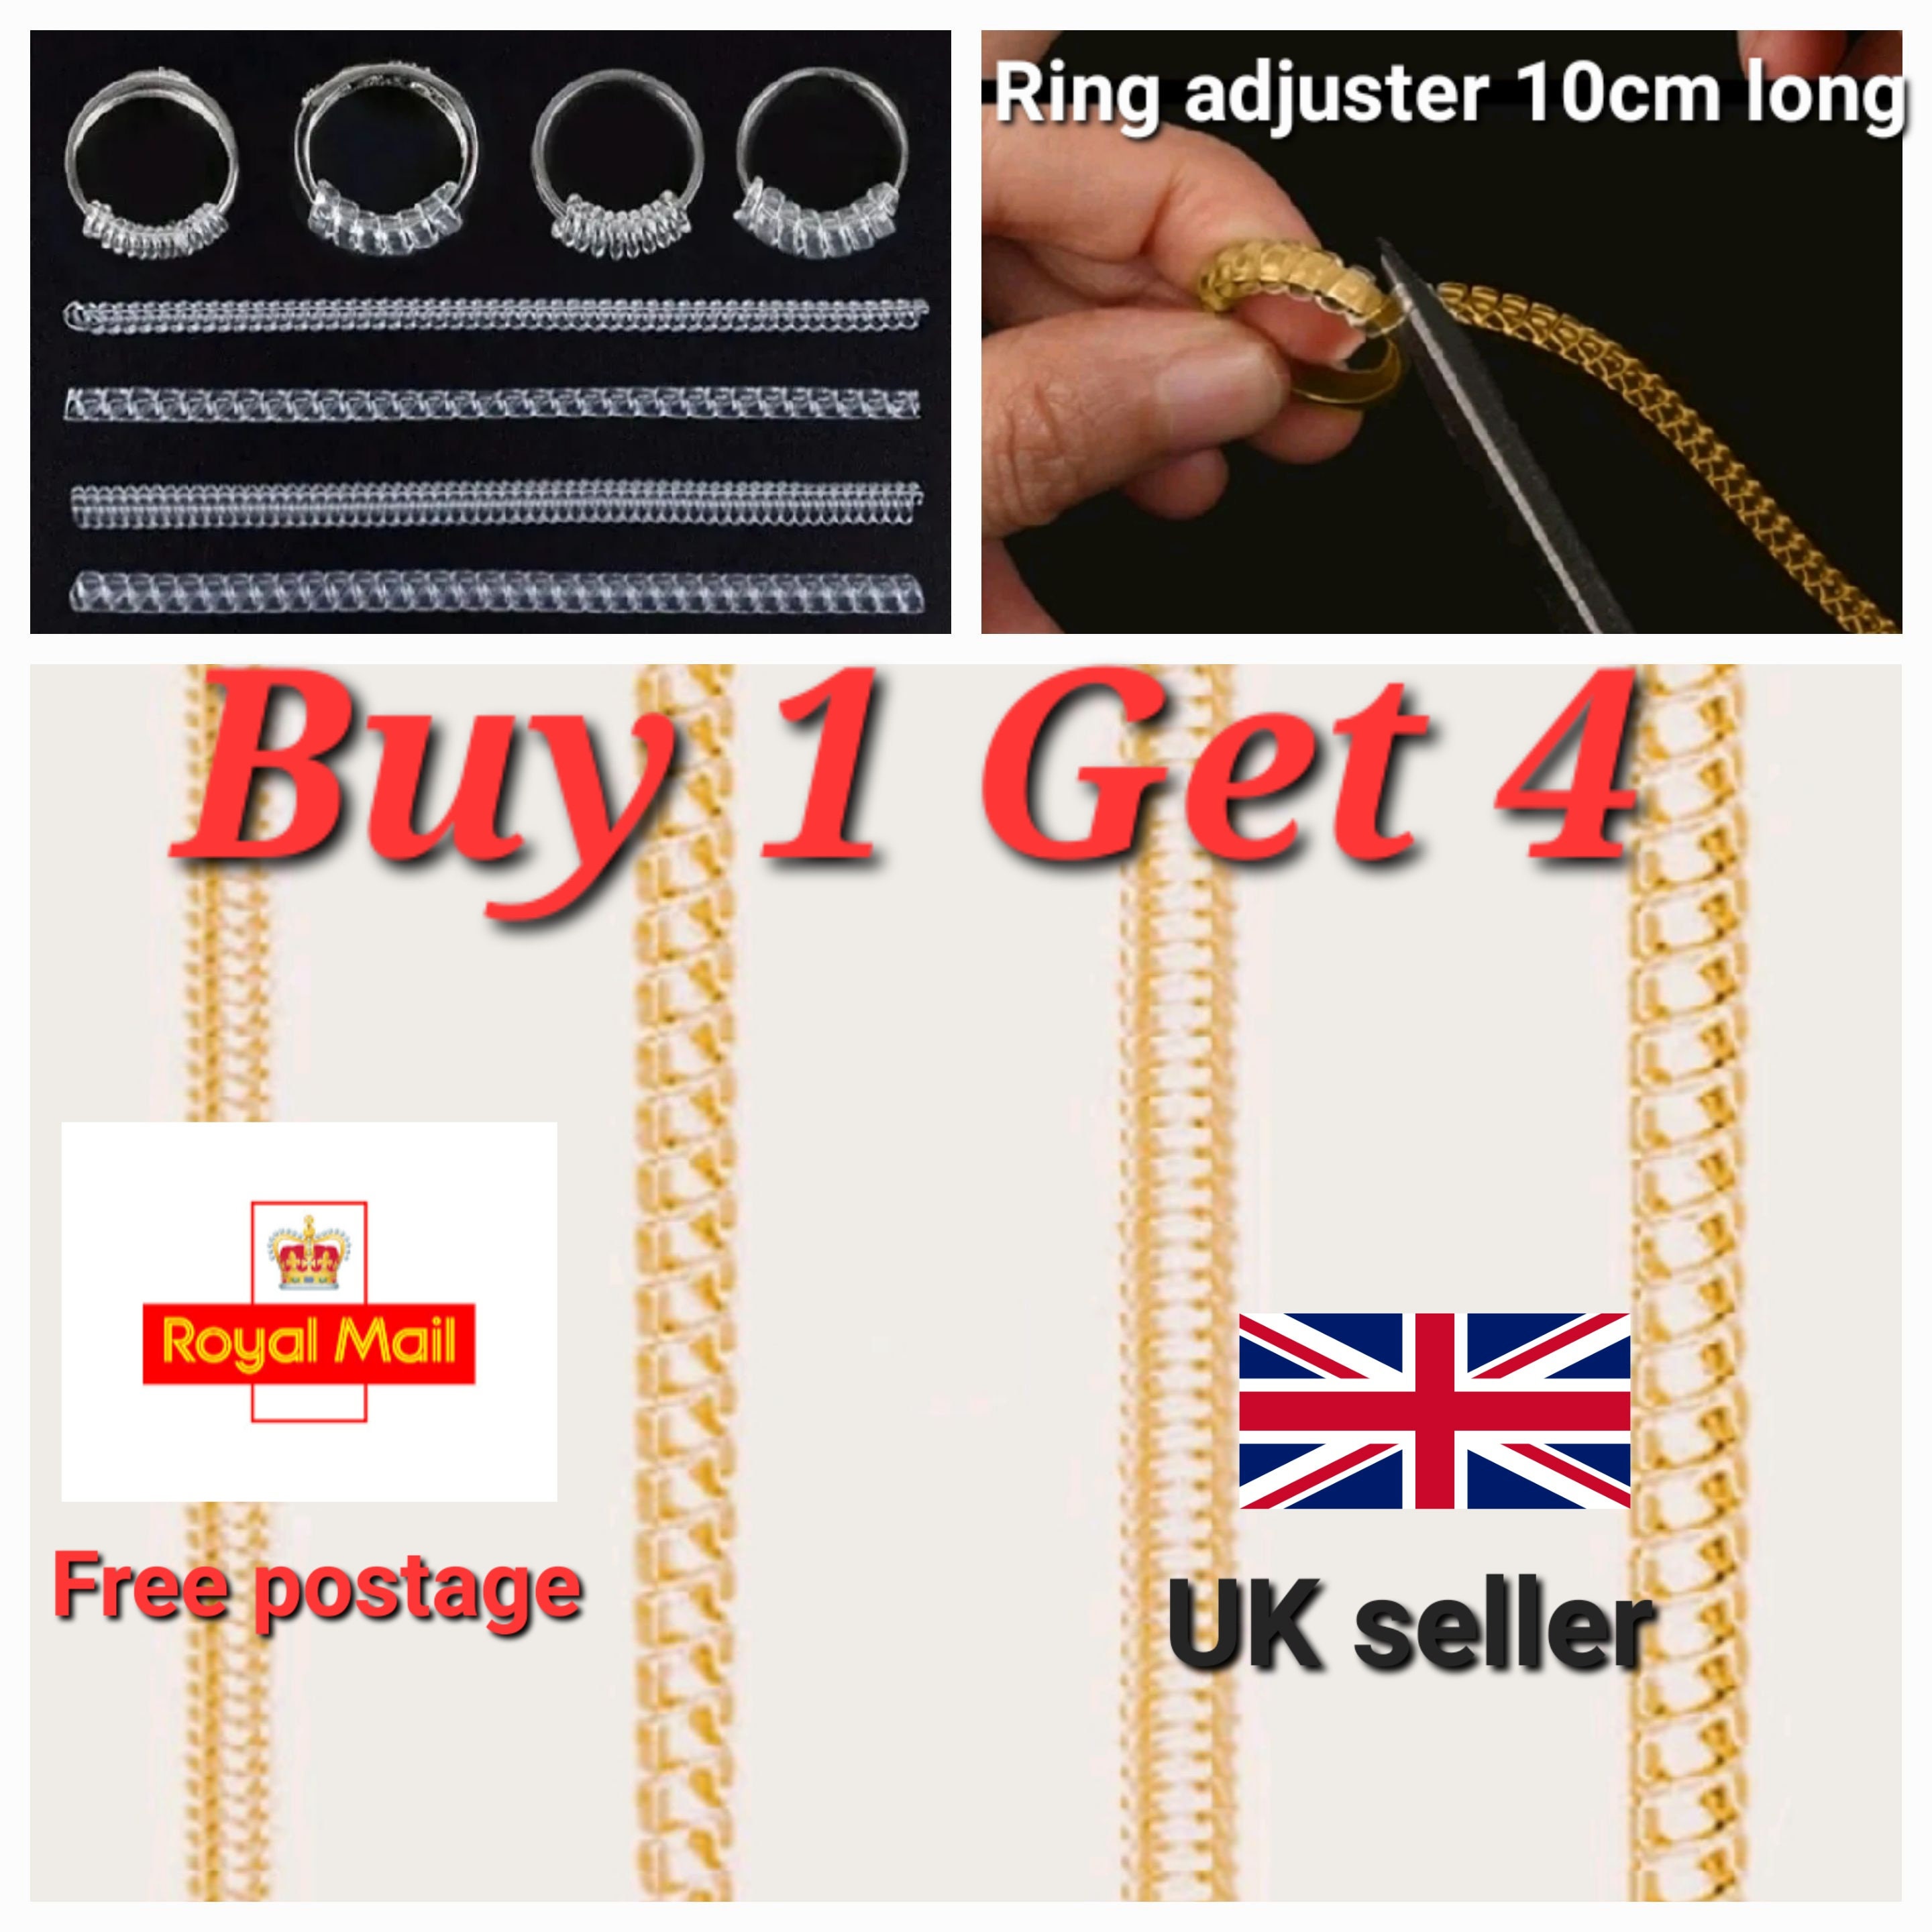 14kt Gold Filled Ring Sizer Adjuster Fits Any Ring Sizer for Loose Rings  New Small Medium Large Size Pack of 3 